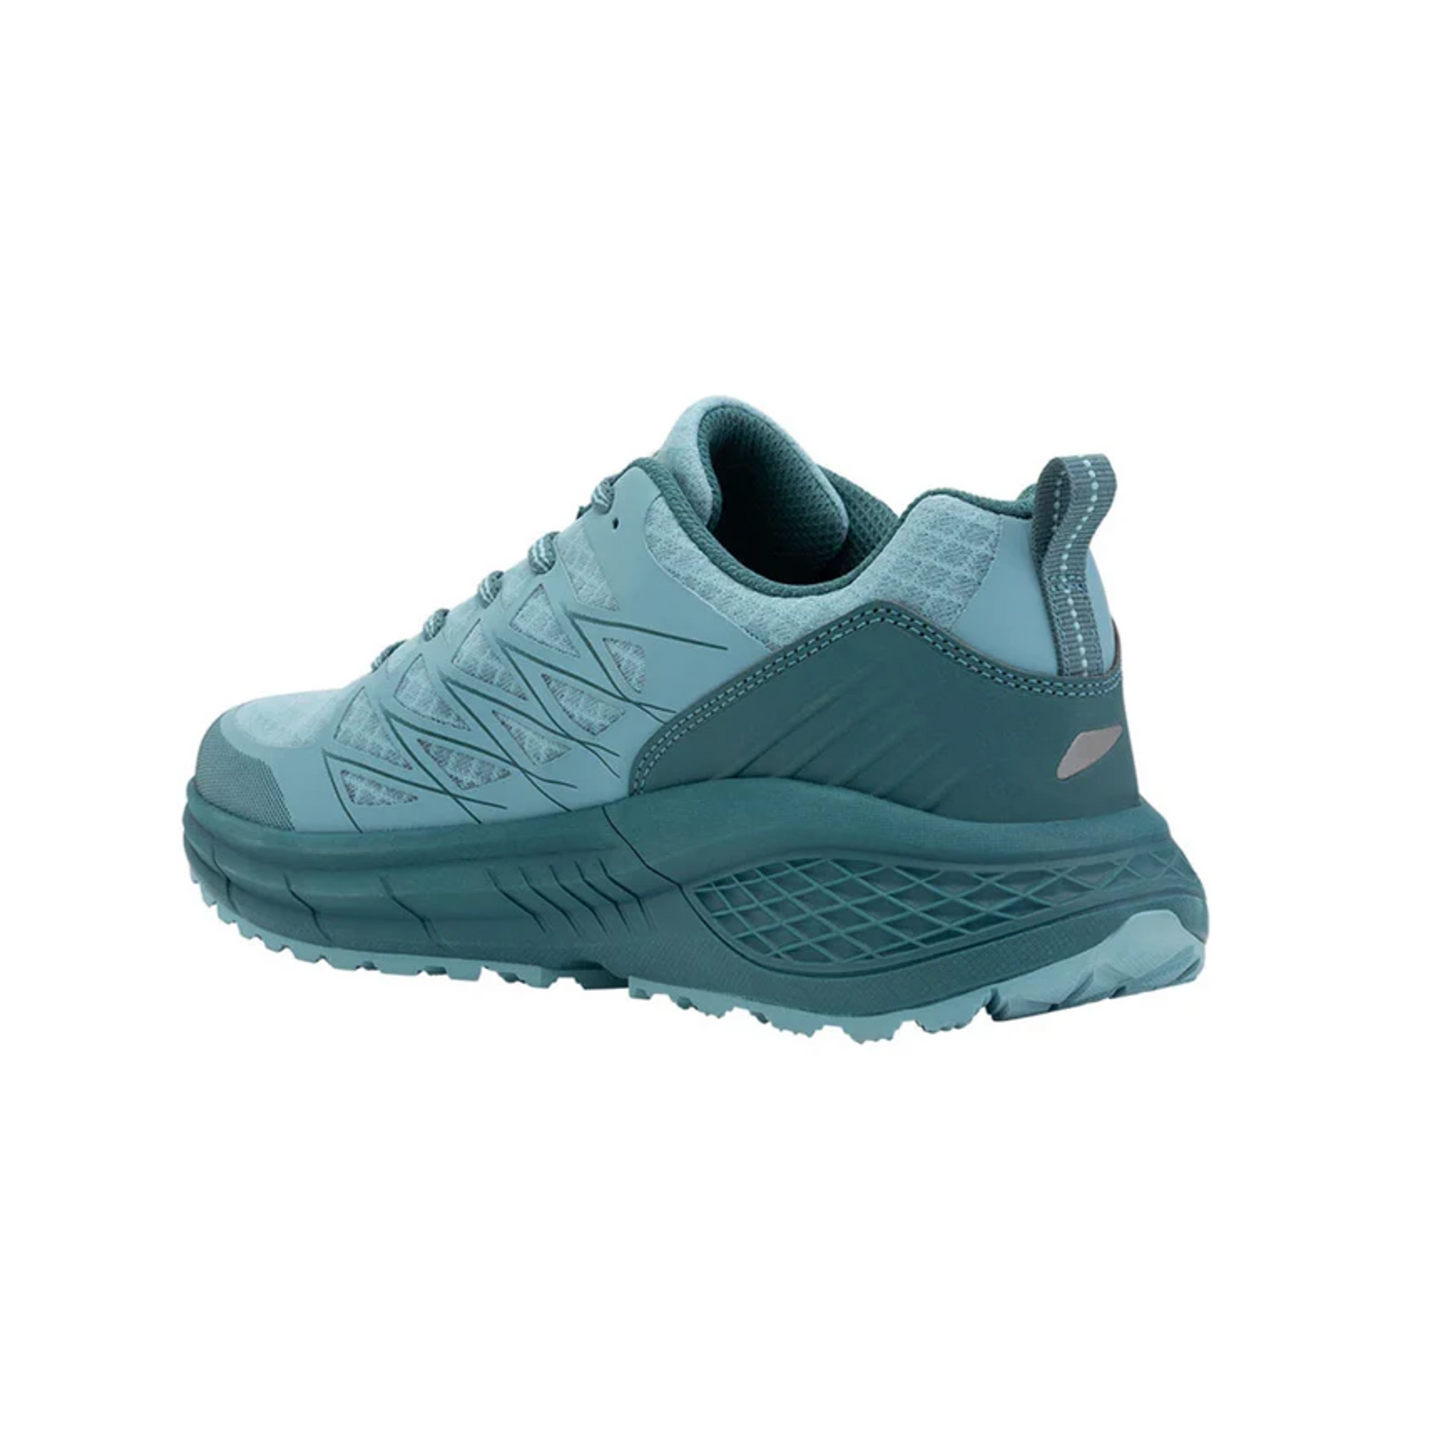 Women's Trail Lite Porcelain/Shaded Spruce/Cool Grey